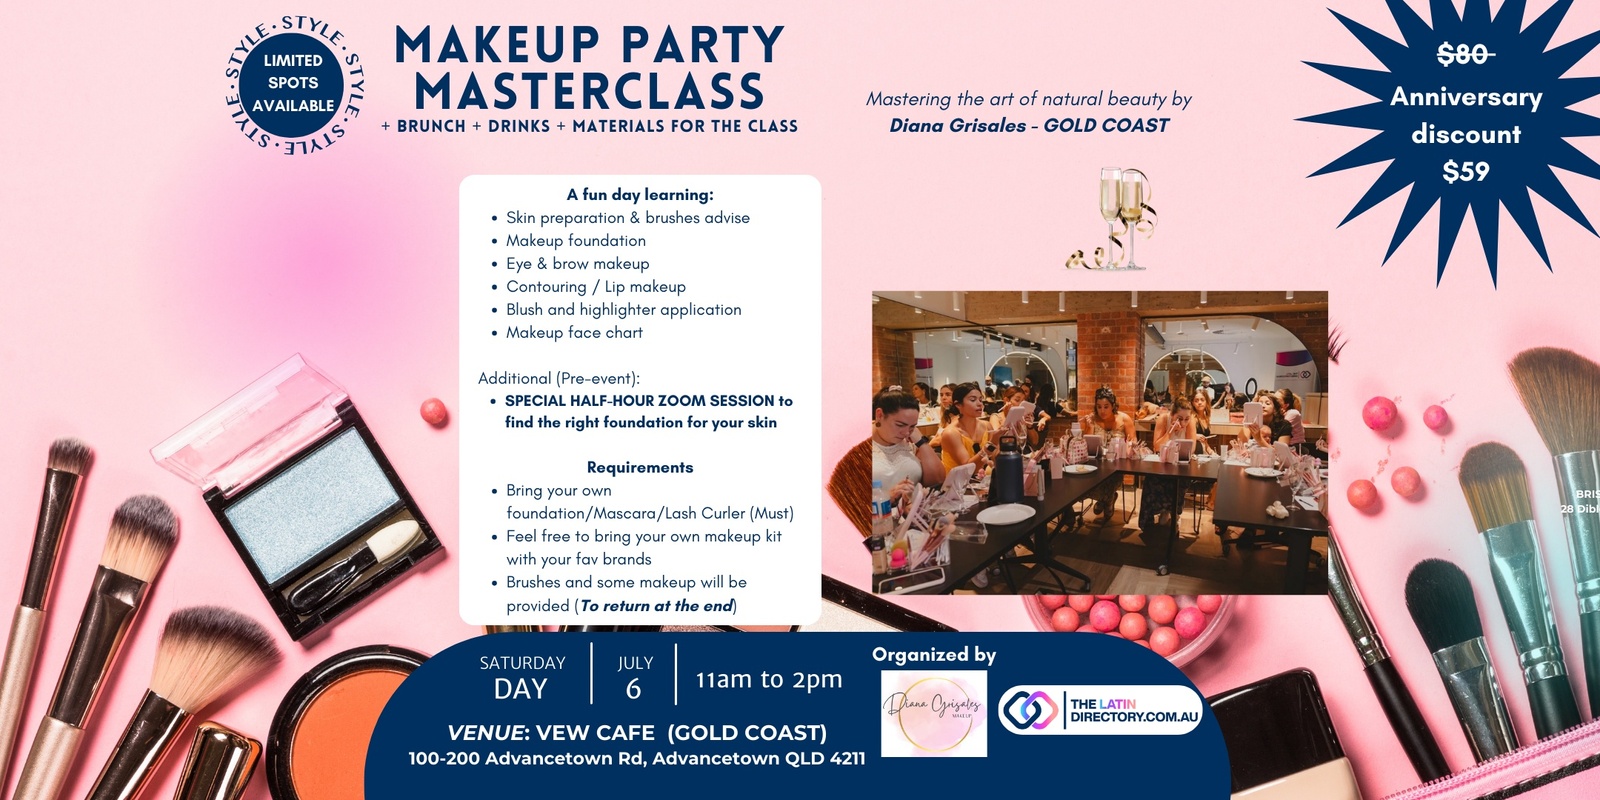 Banner image for MAKEUP PARTY MASTERCLASS GOLD COAST